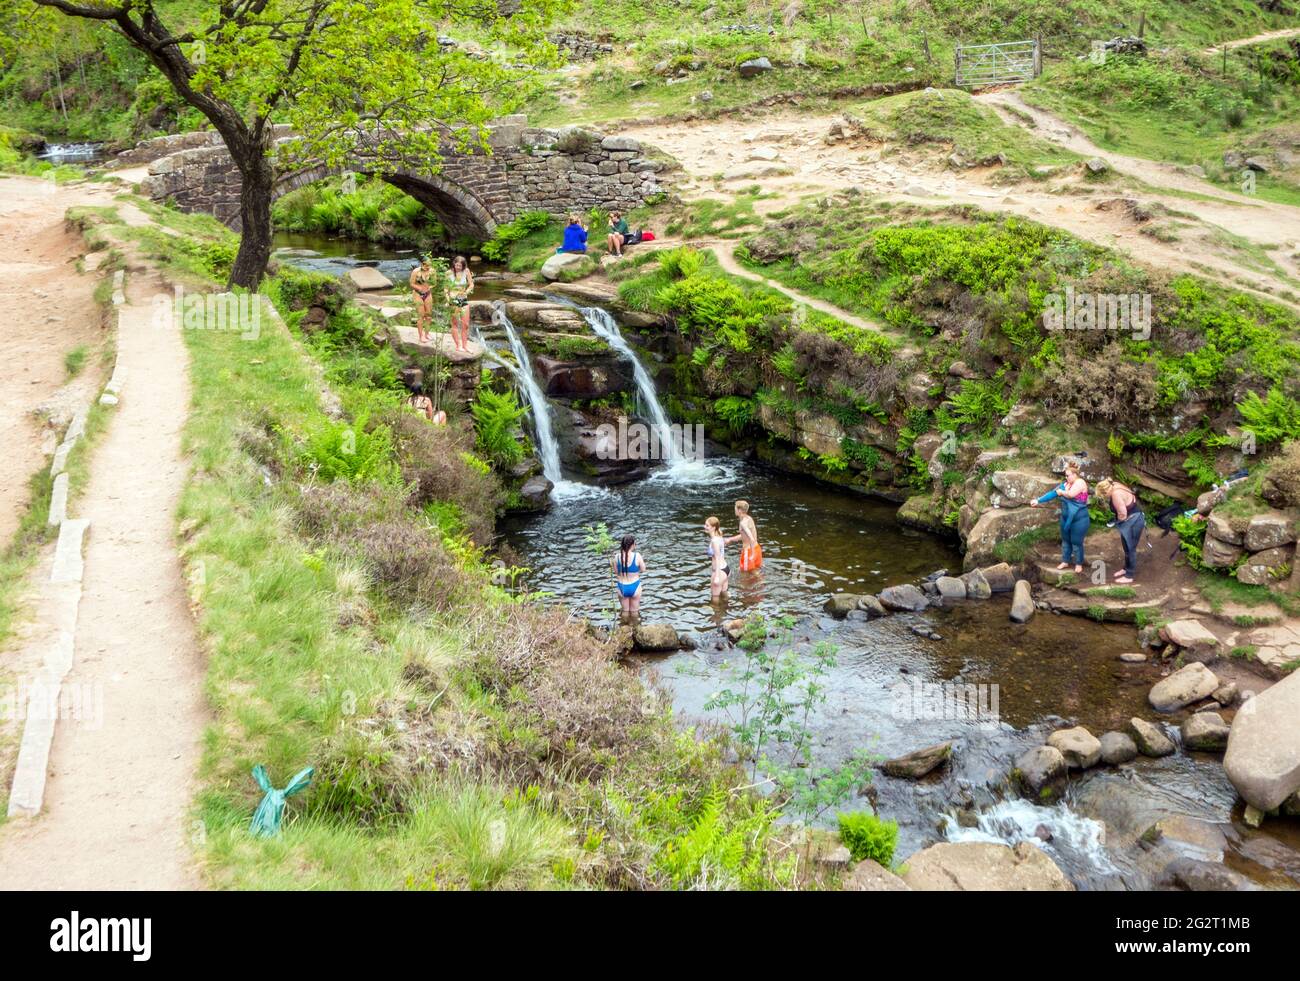 People picnicking and swimming in  the river Dane at the Three Shires Head  where Cheshire, Derbyshire and Staffordshire meet in the Peak District Stock Photo